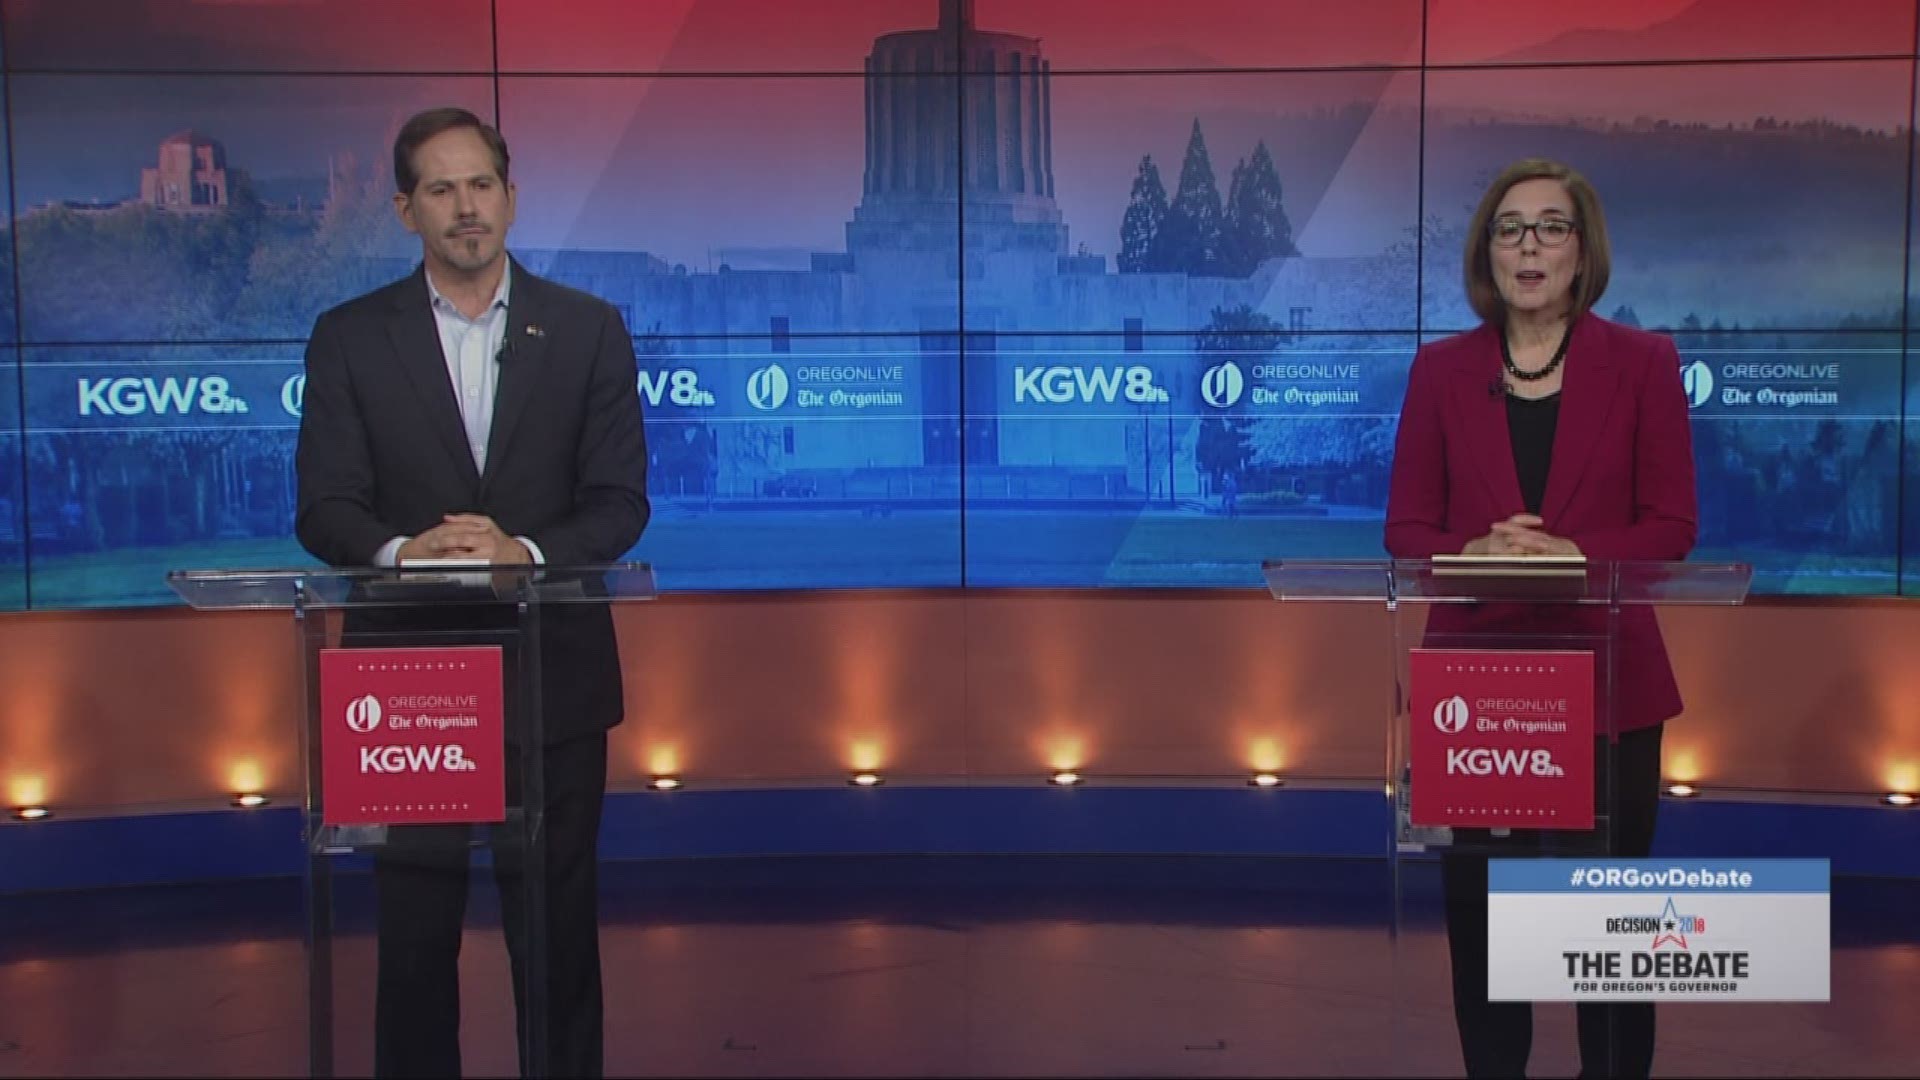 Rep. Buehler says he doesn't approve of President Trump's leadership. Gov. Brown says Trump stomps on Oregon's values. Debate aired on KGW on Oct. 9, 2018.